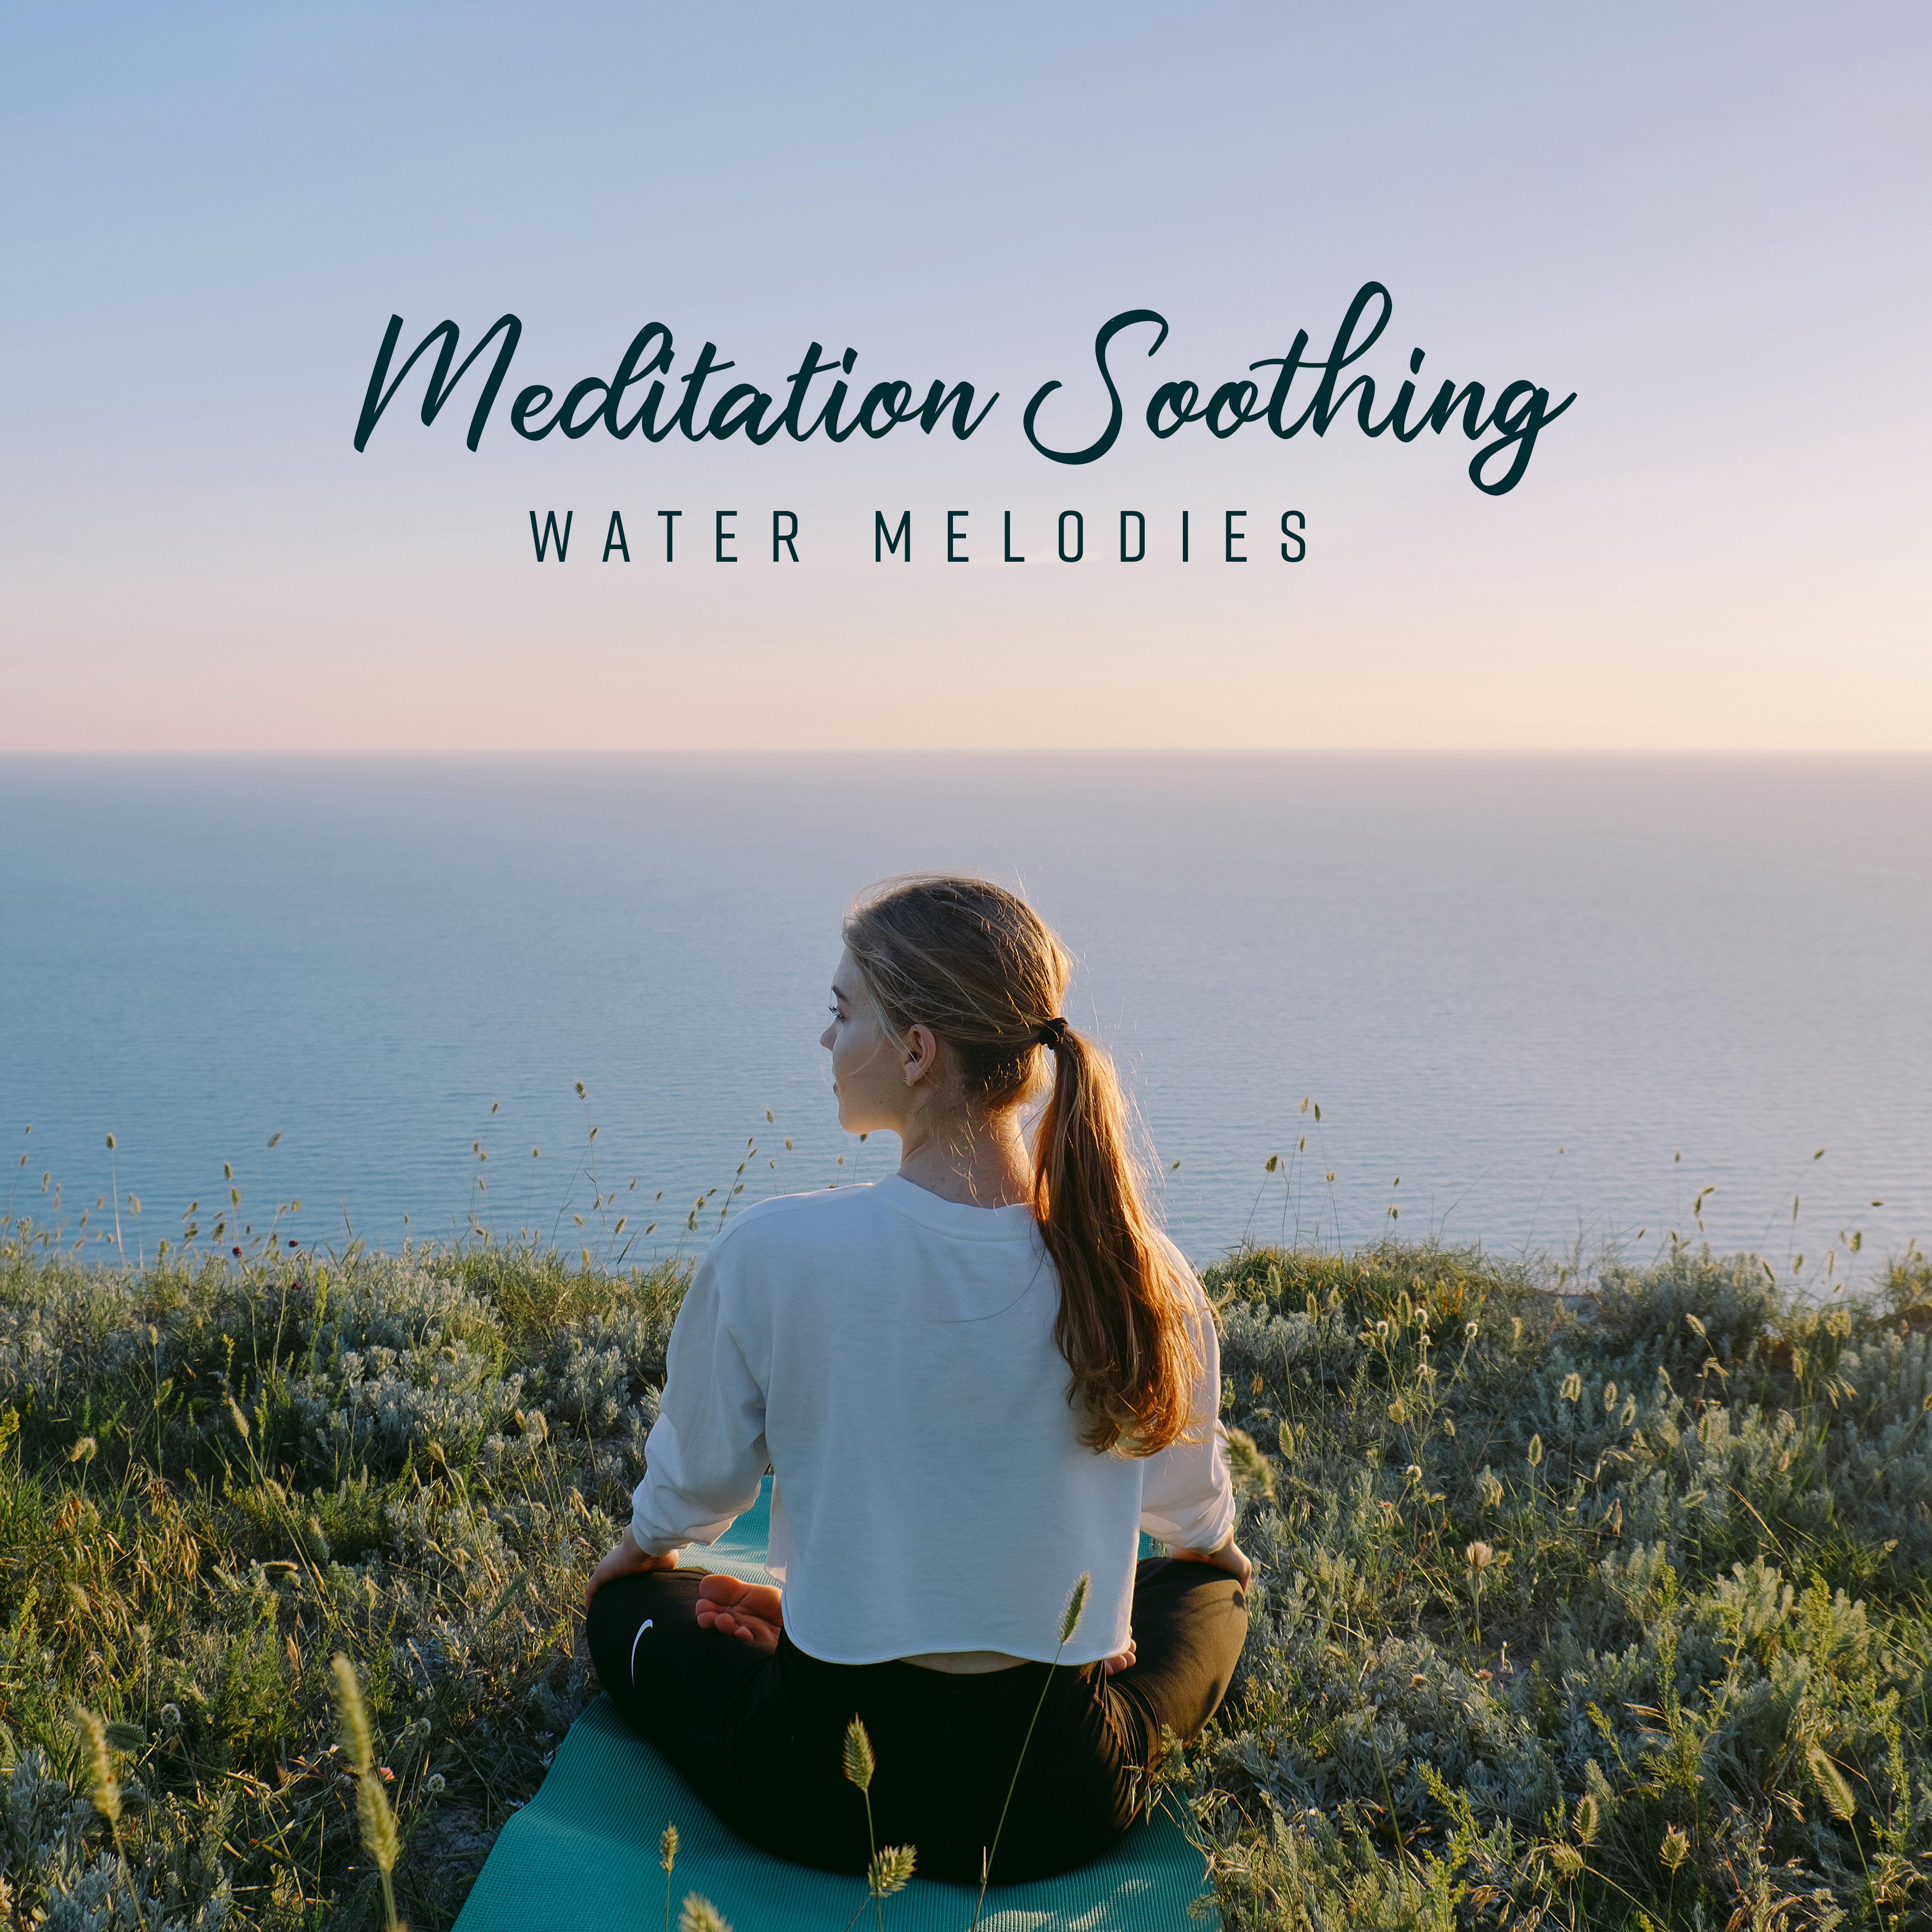 Meditation Soothing Water Melodies: 2019 New Age Nature Music with Sounds of Water, Songs for Mediation & Deep Relaxation